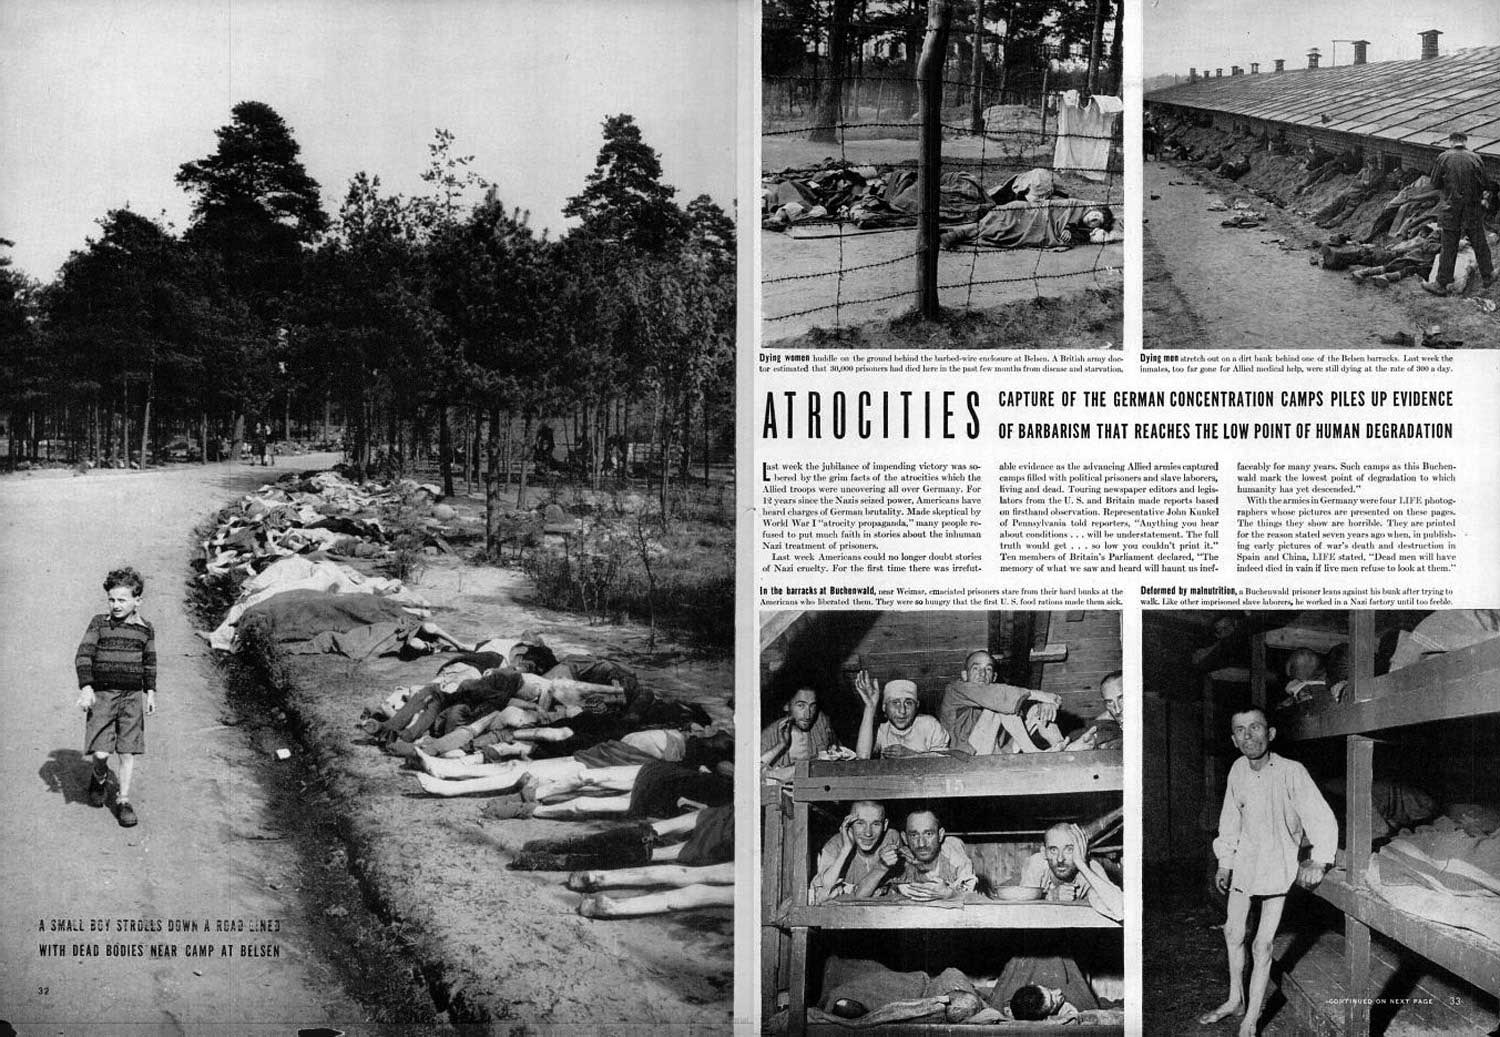 Life magazine, May 7, 1945. Credits: page 32—George Rodger; page 33—George Rodger (top), Margaret Bourke-White (bottom).